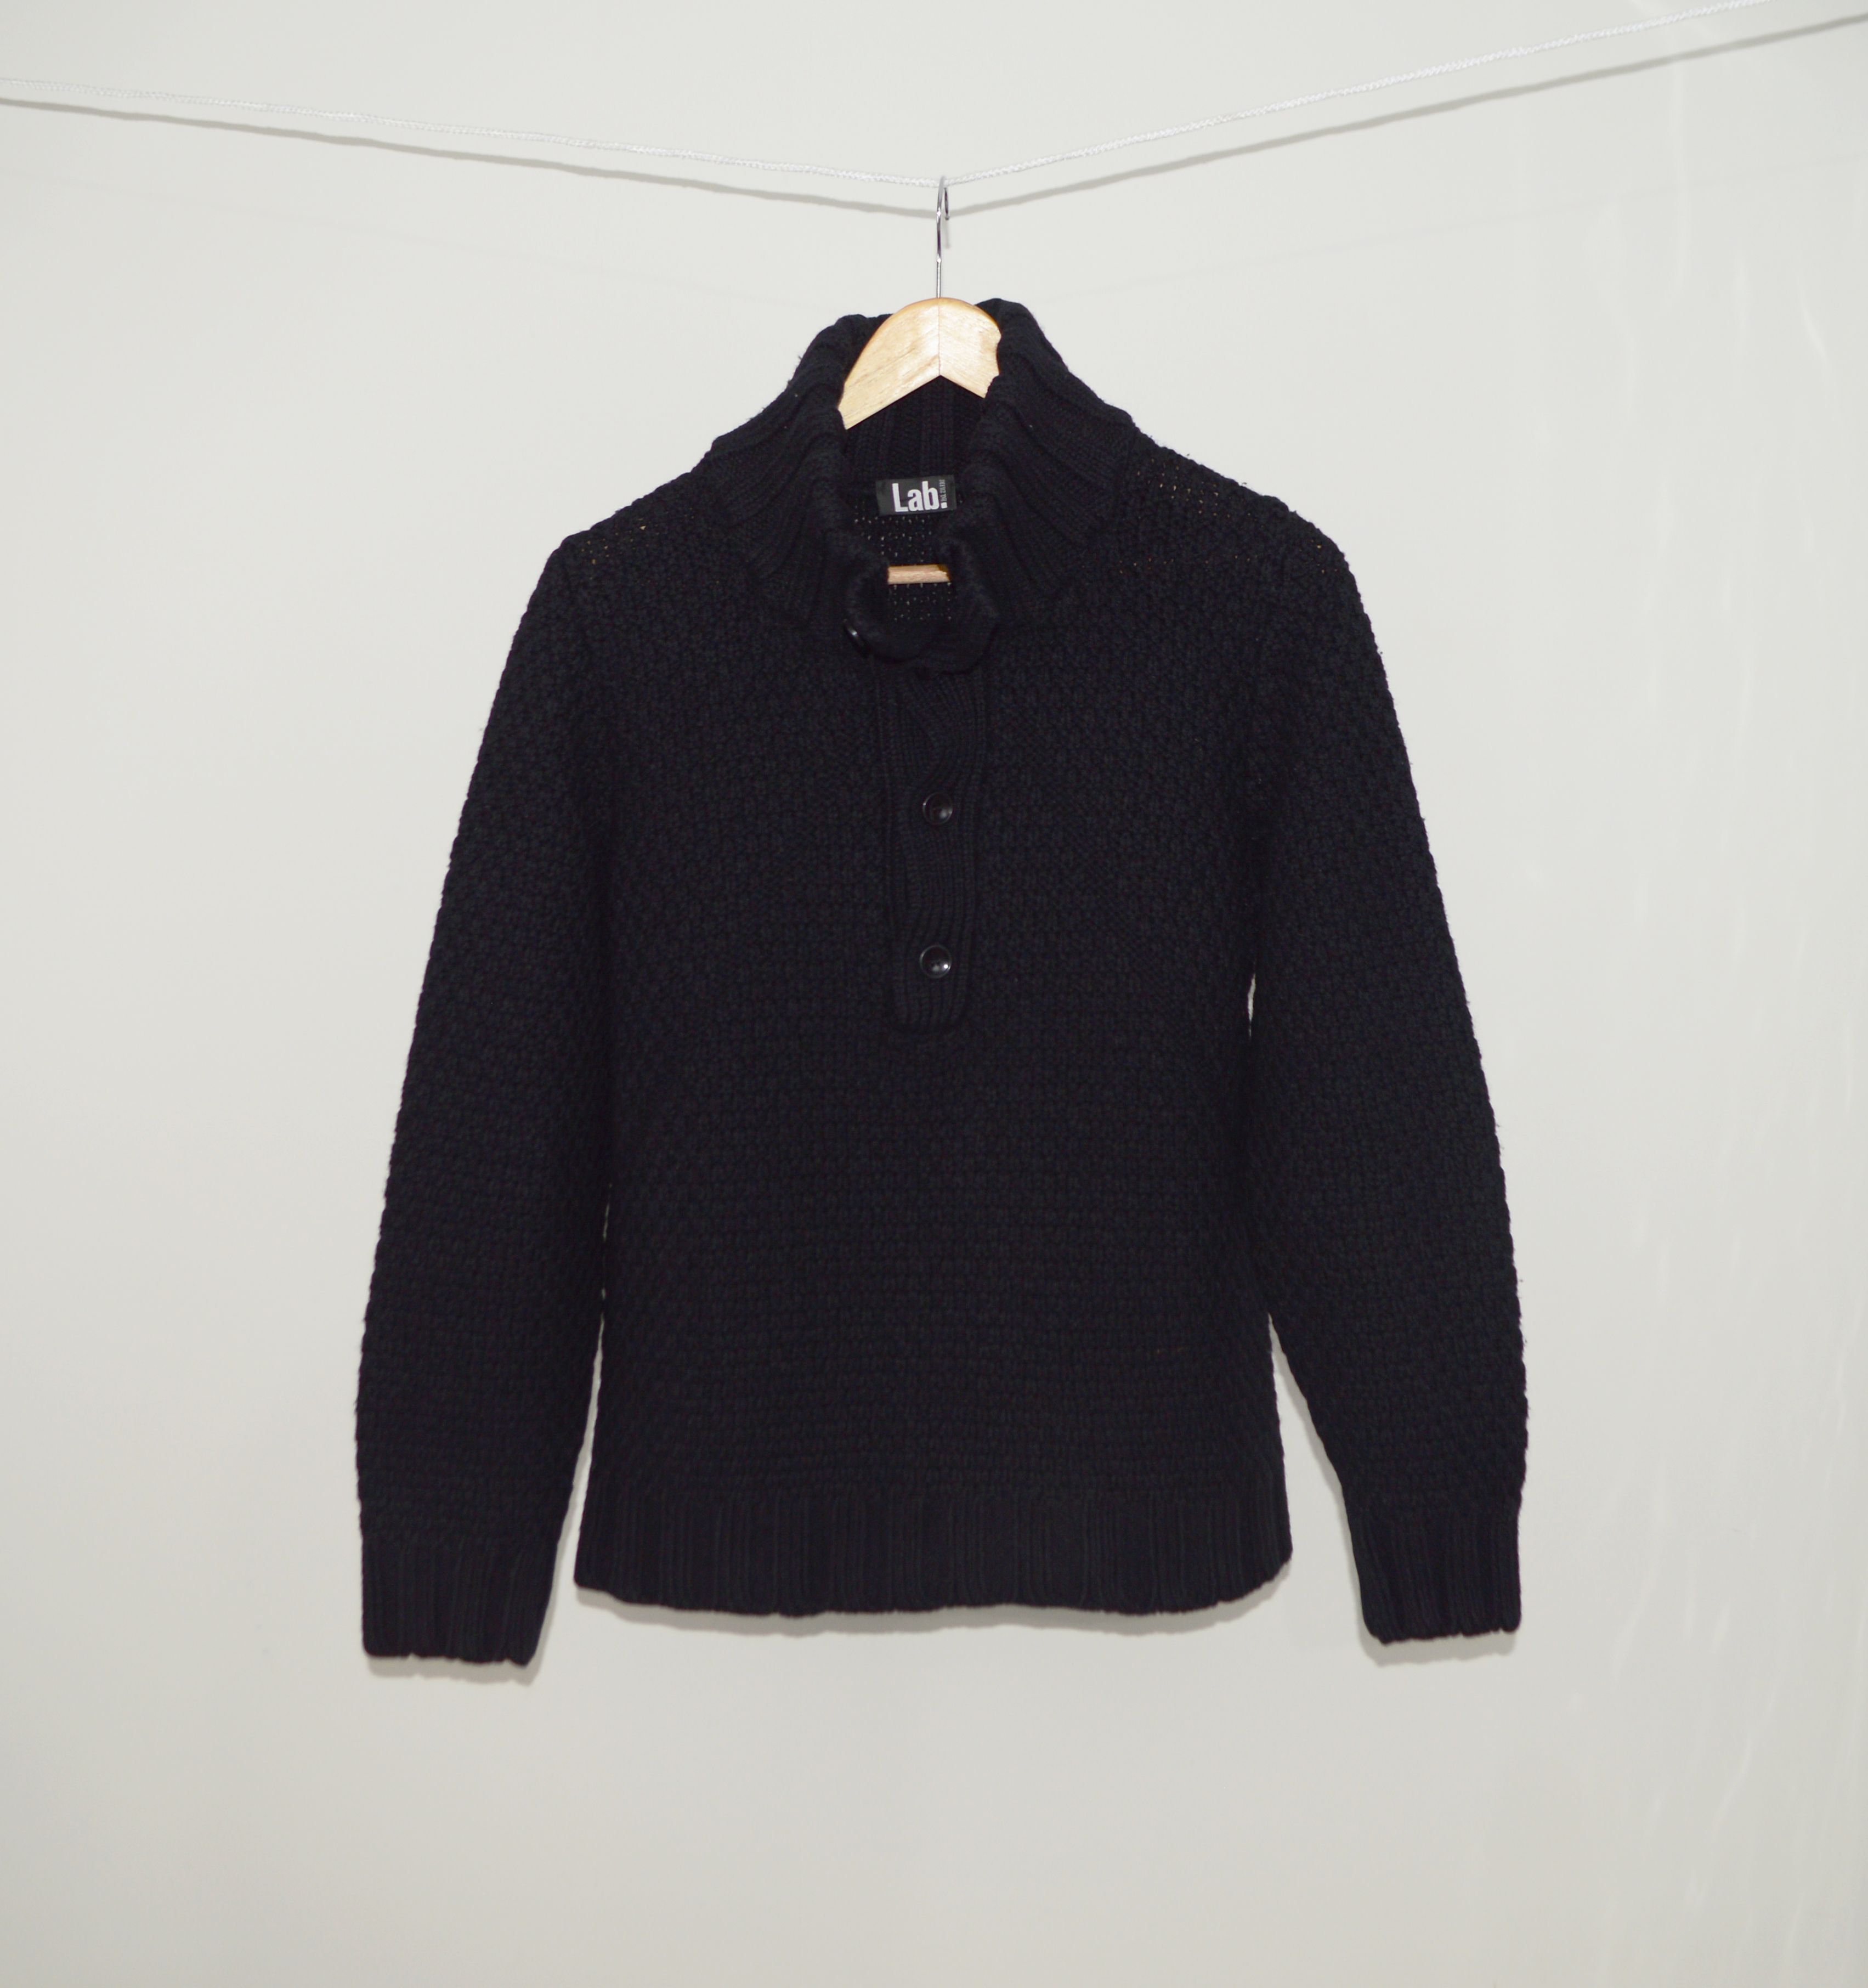 Pal Zileri Pal Zileri LAB Cable Knit Wool Sweater | Grailed